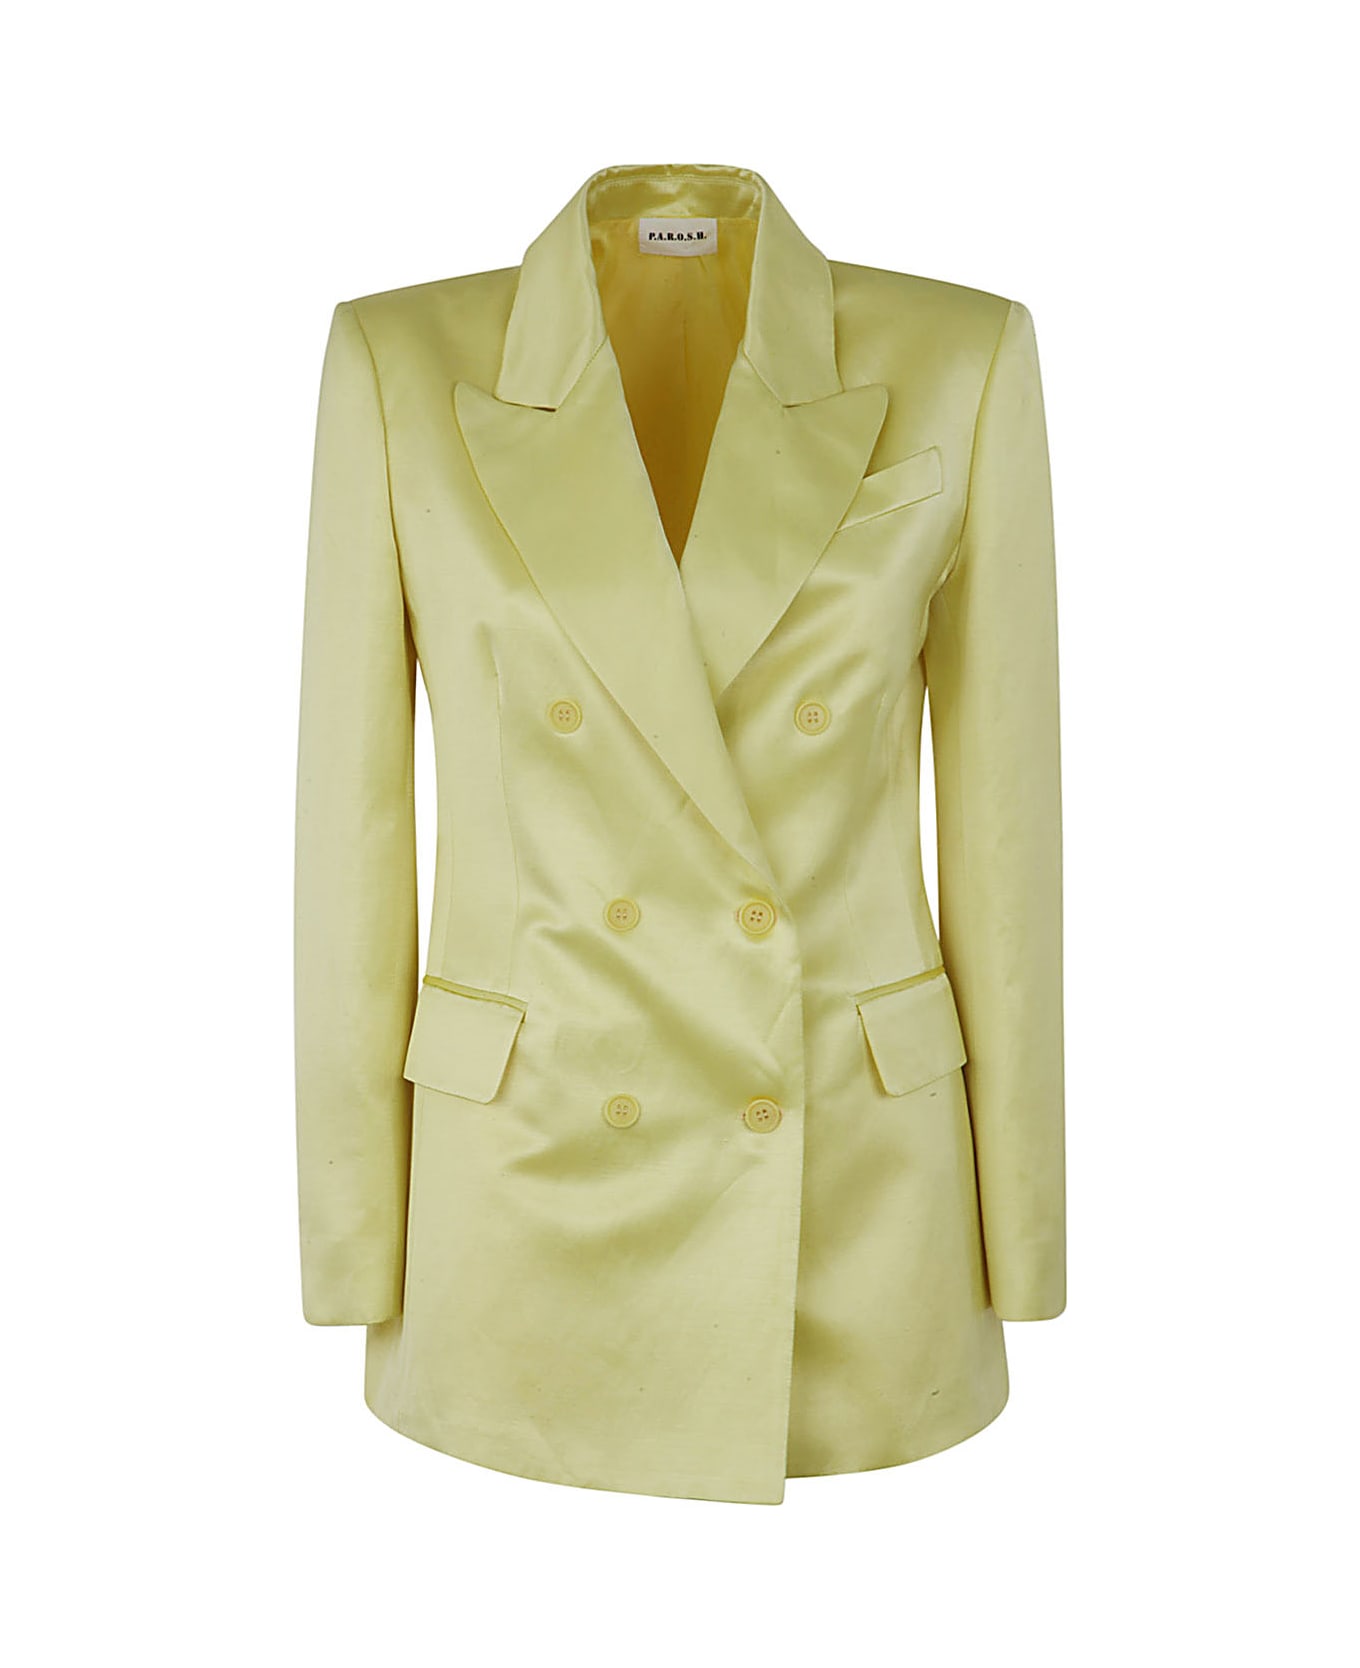 Parosh Double Breasted Satin,viscose And Linen Jacket - Light Yellow